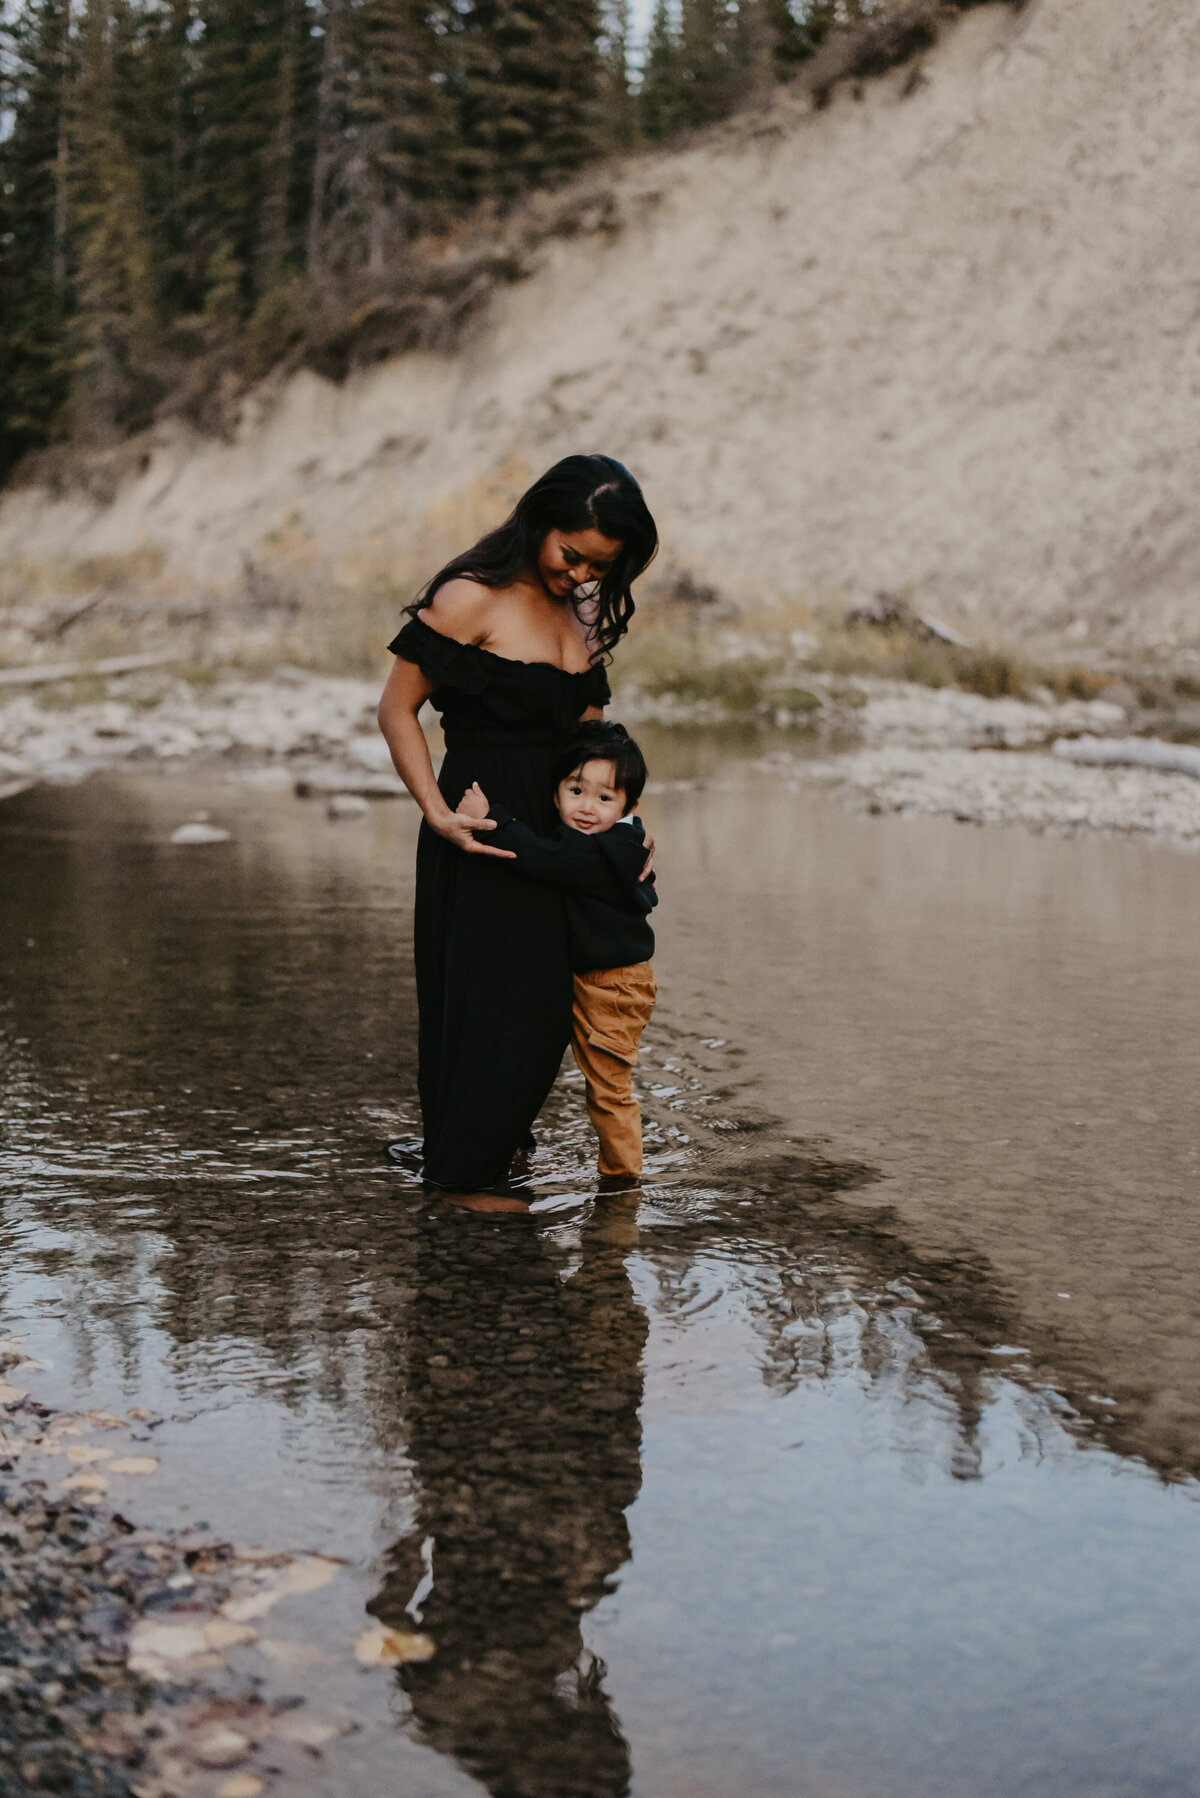 woman in black dress with her child stands in water